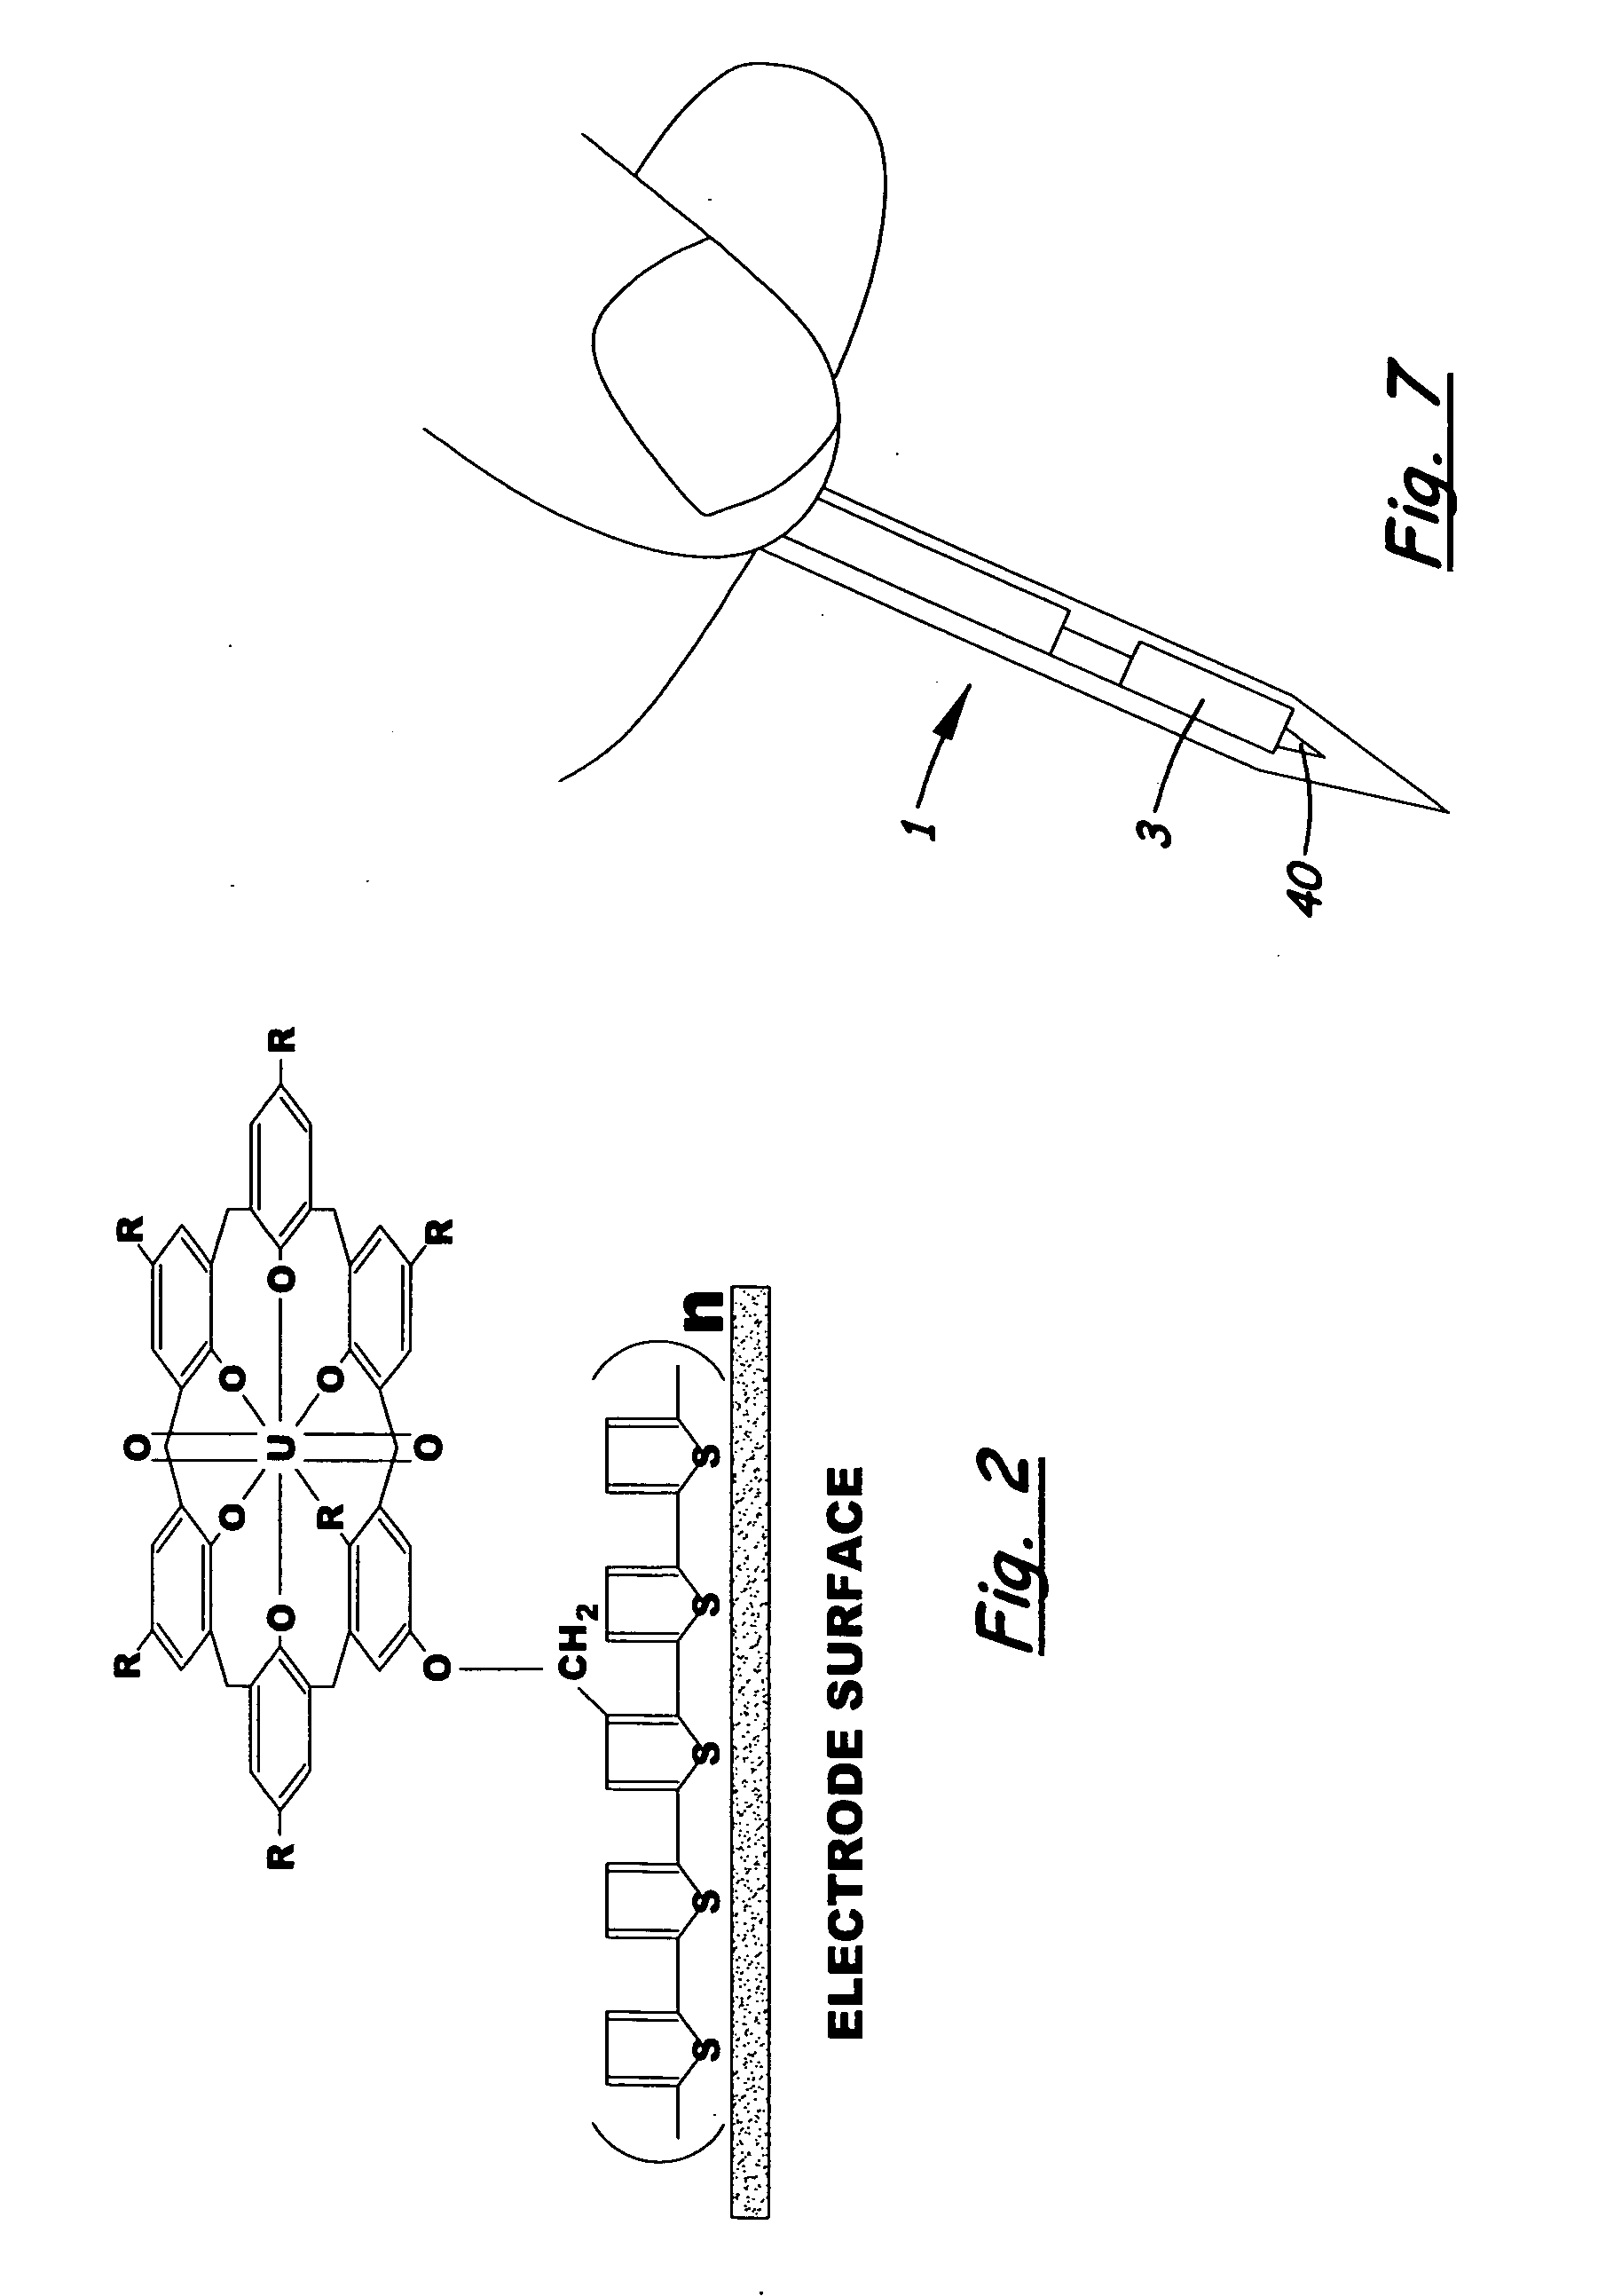 Field portable electrochemical sensor for uranium and other actinides